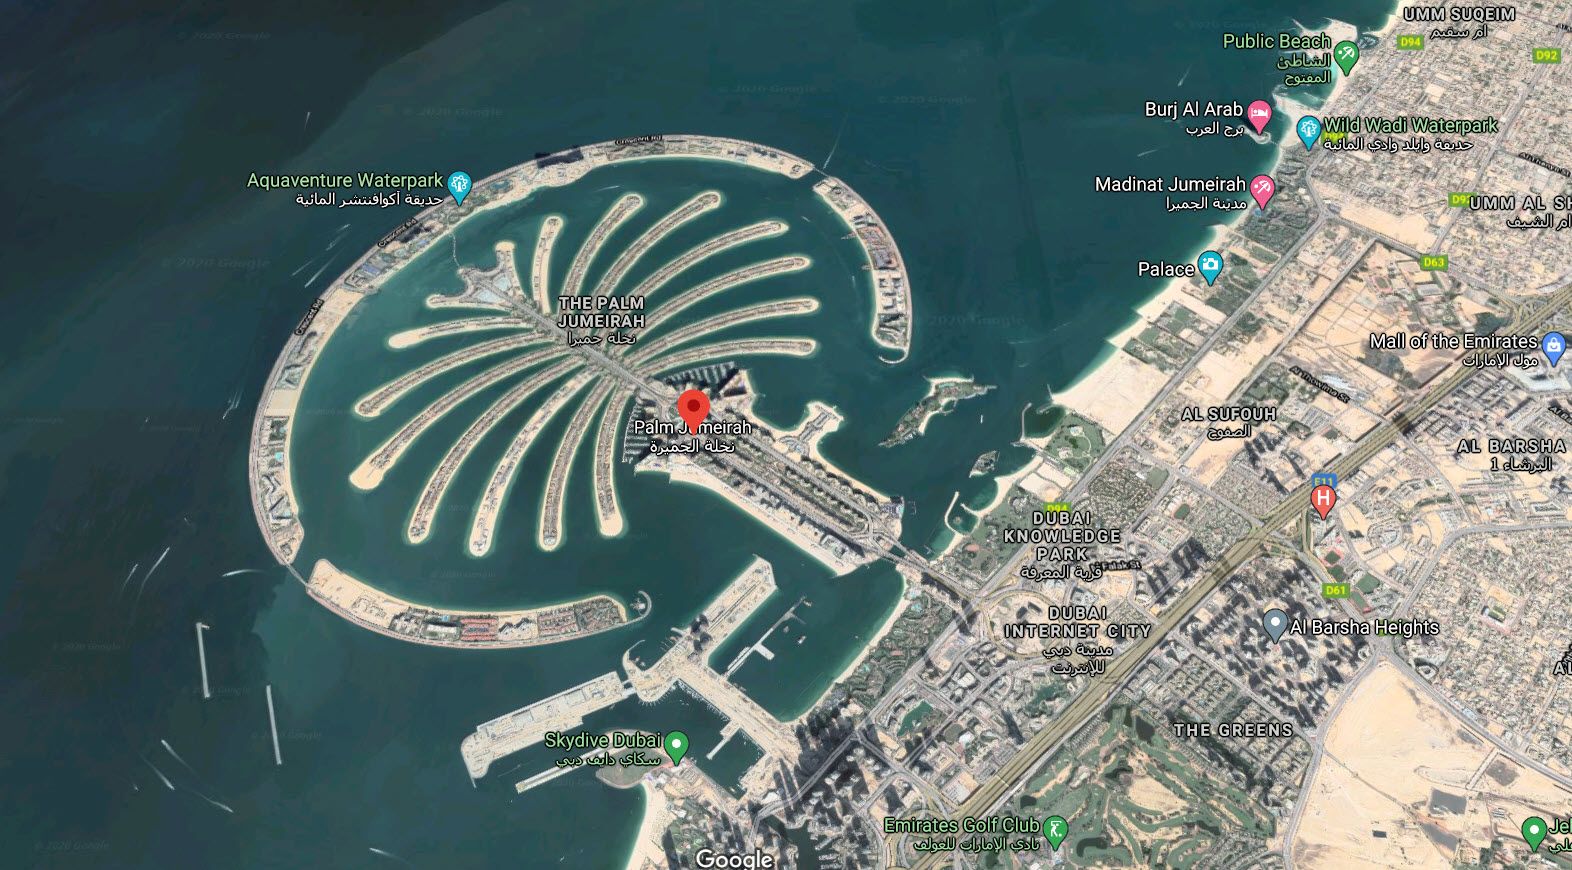 Google Maps Satellite View of Palm Islands